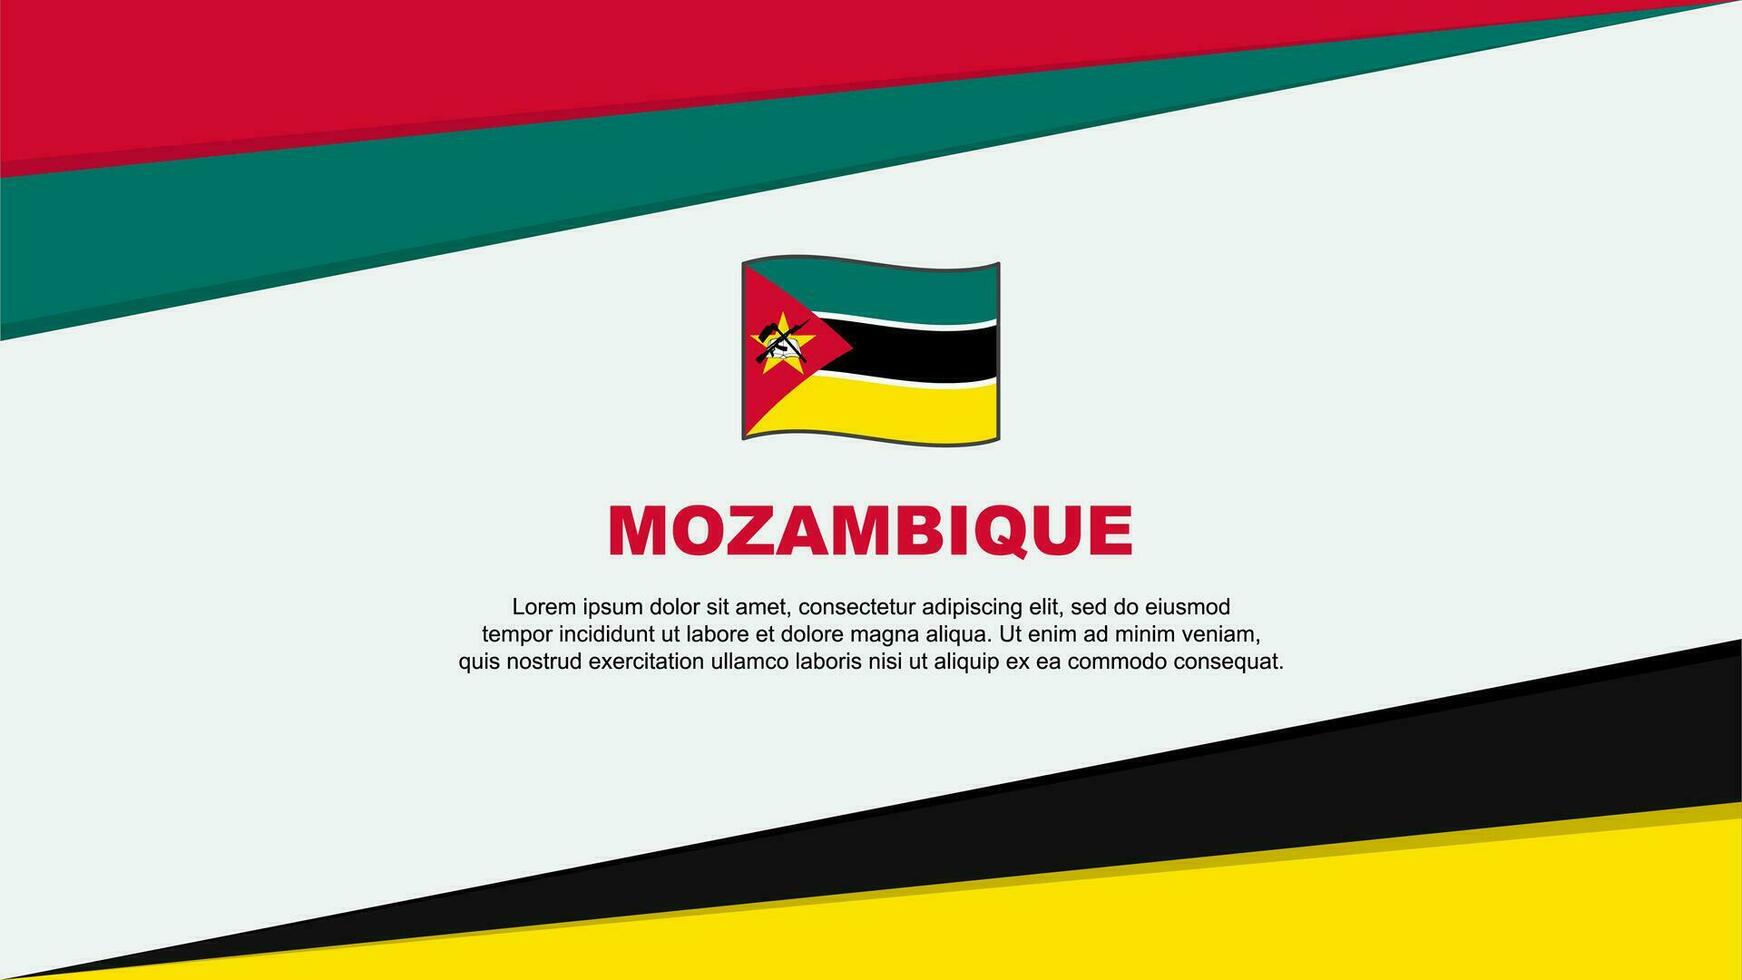 Mozambique Flag Abstract Background Design Template. Mozambique Independence Day Banner Cartoon Vector Illustration. Mozambique Design